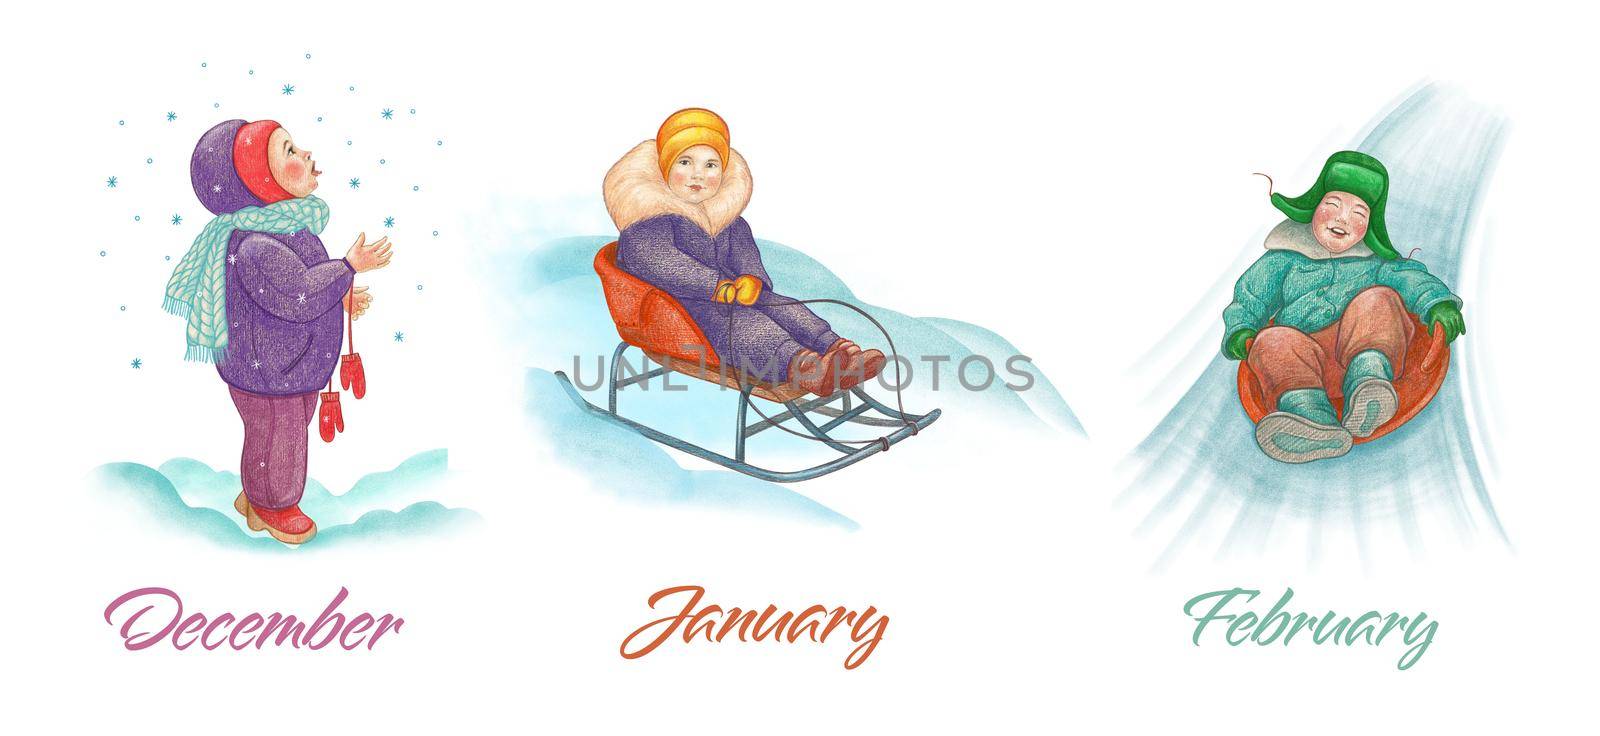 Children. Winter. The child catches snowflakes with his tongue. A girl is sledding. A boy rides on an ice slide from a slide. by Manka